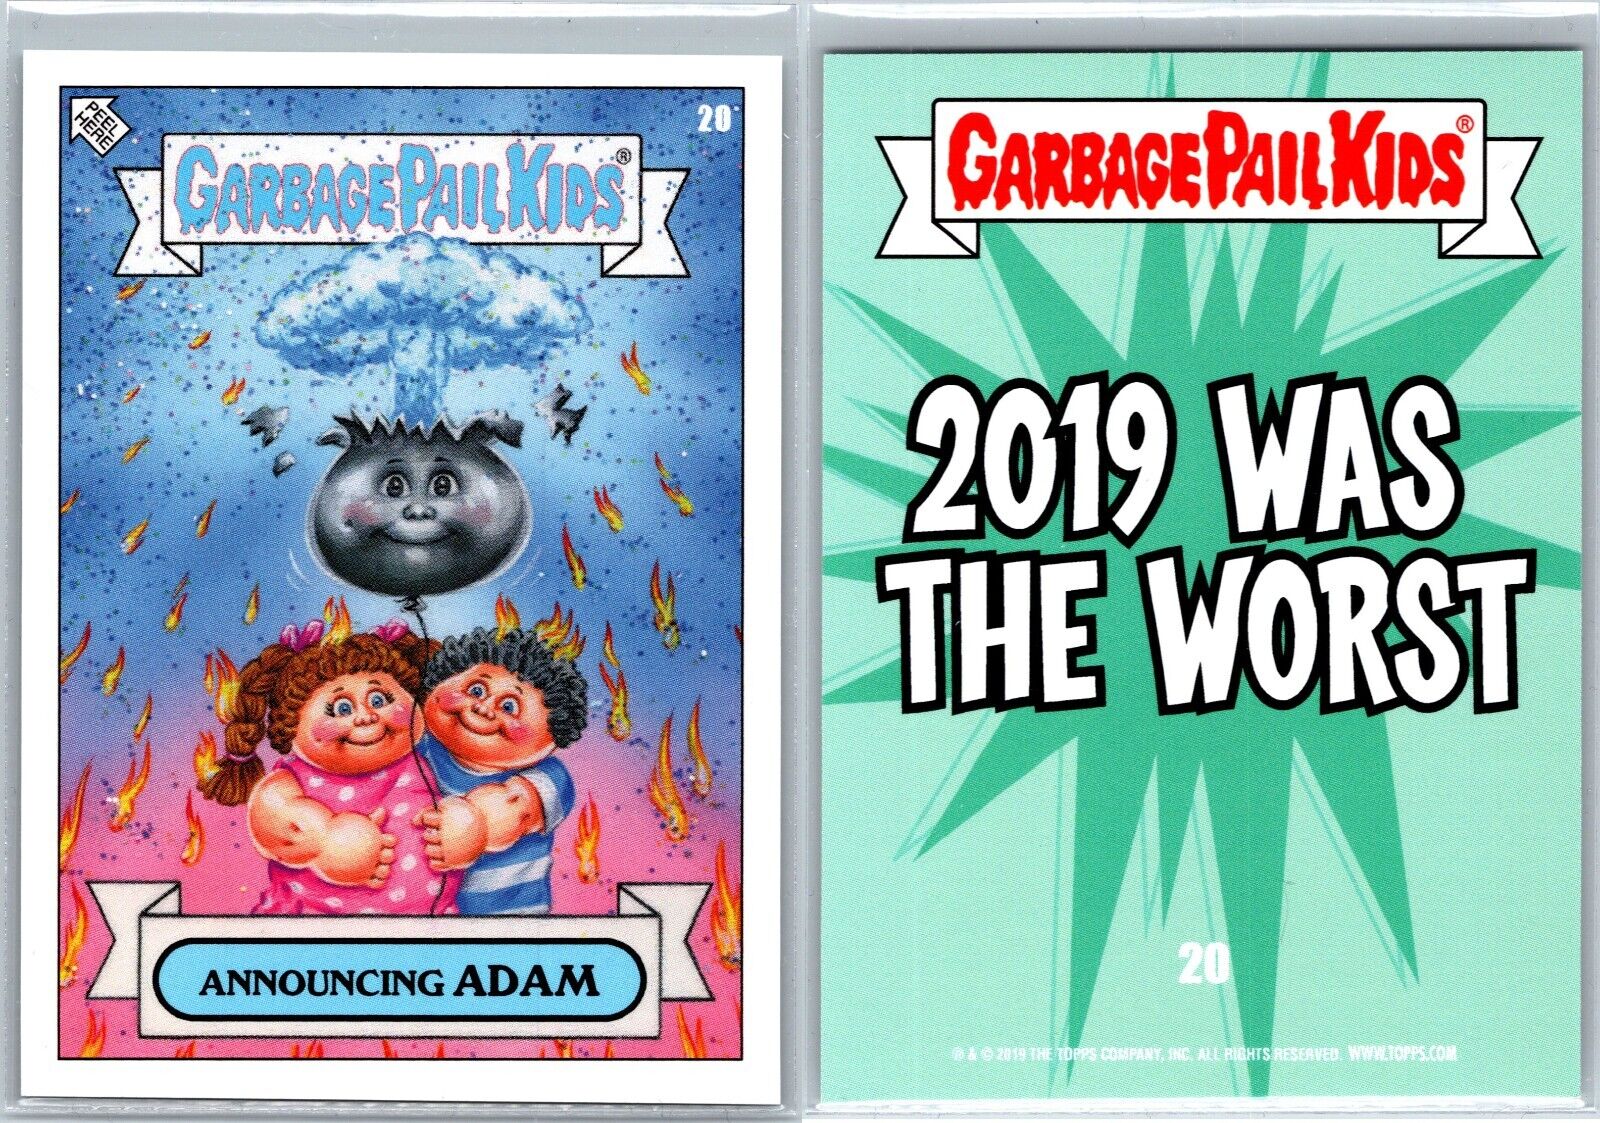 Topps Garbage Pail Kids GPK ERROR CARD BACK Announcing ADAM \'2019 Was the Worst\'